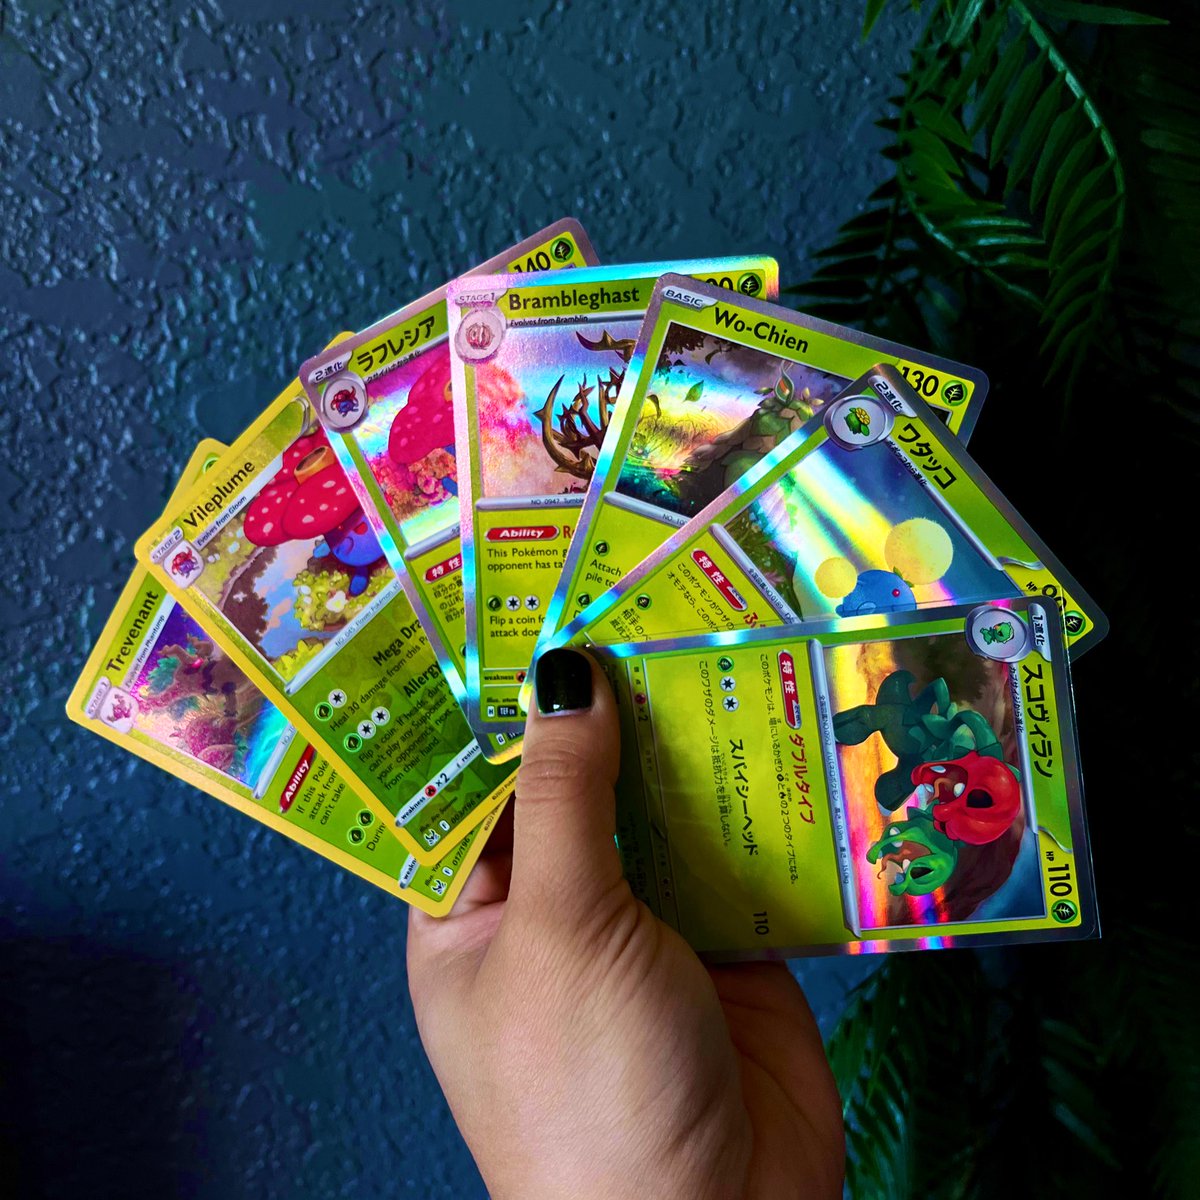 💚Pokémon card GIVEAWAY!!!💚 To enter : 🌱- Like, RT, Follow me and @DenzelxInk -Must be a USA resident -Ends: Friday May 10th -Winner gets everything shown plus some green card sleeves! -Good luck everyone ✨